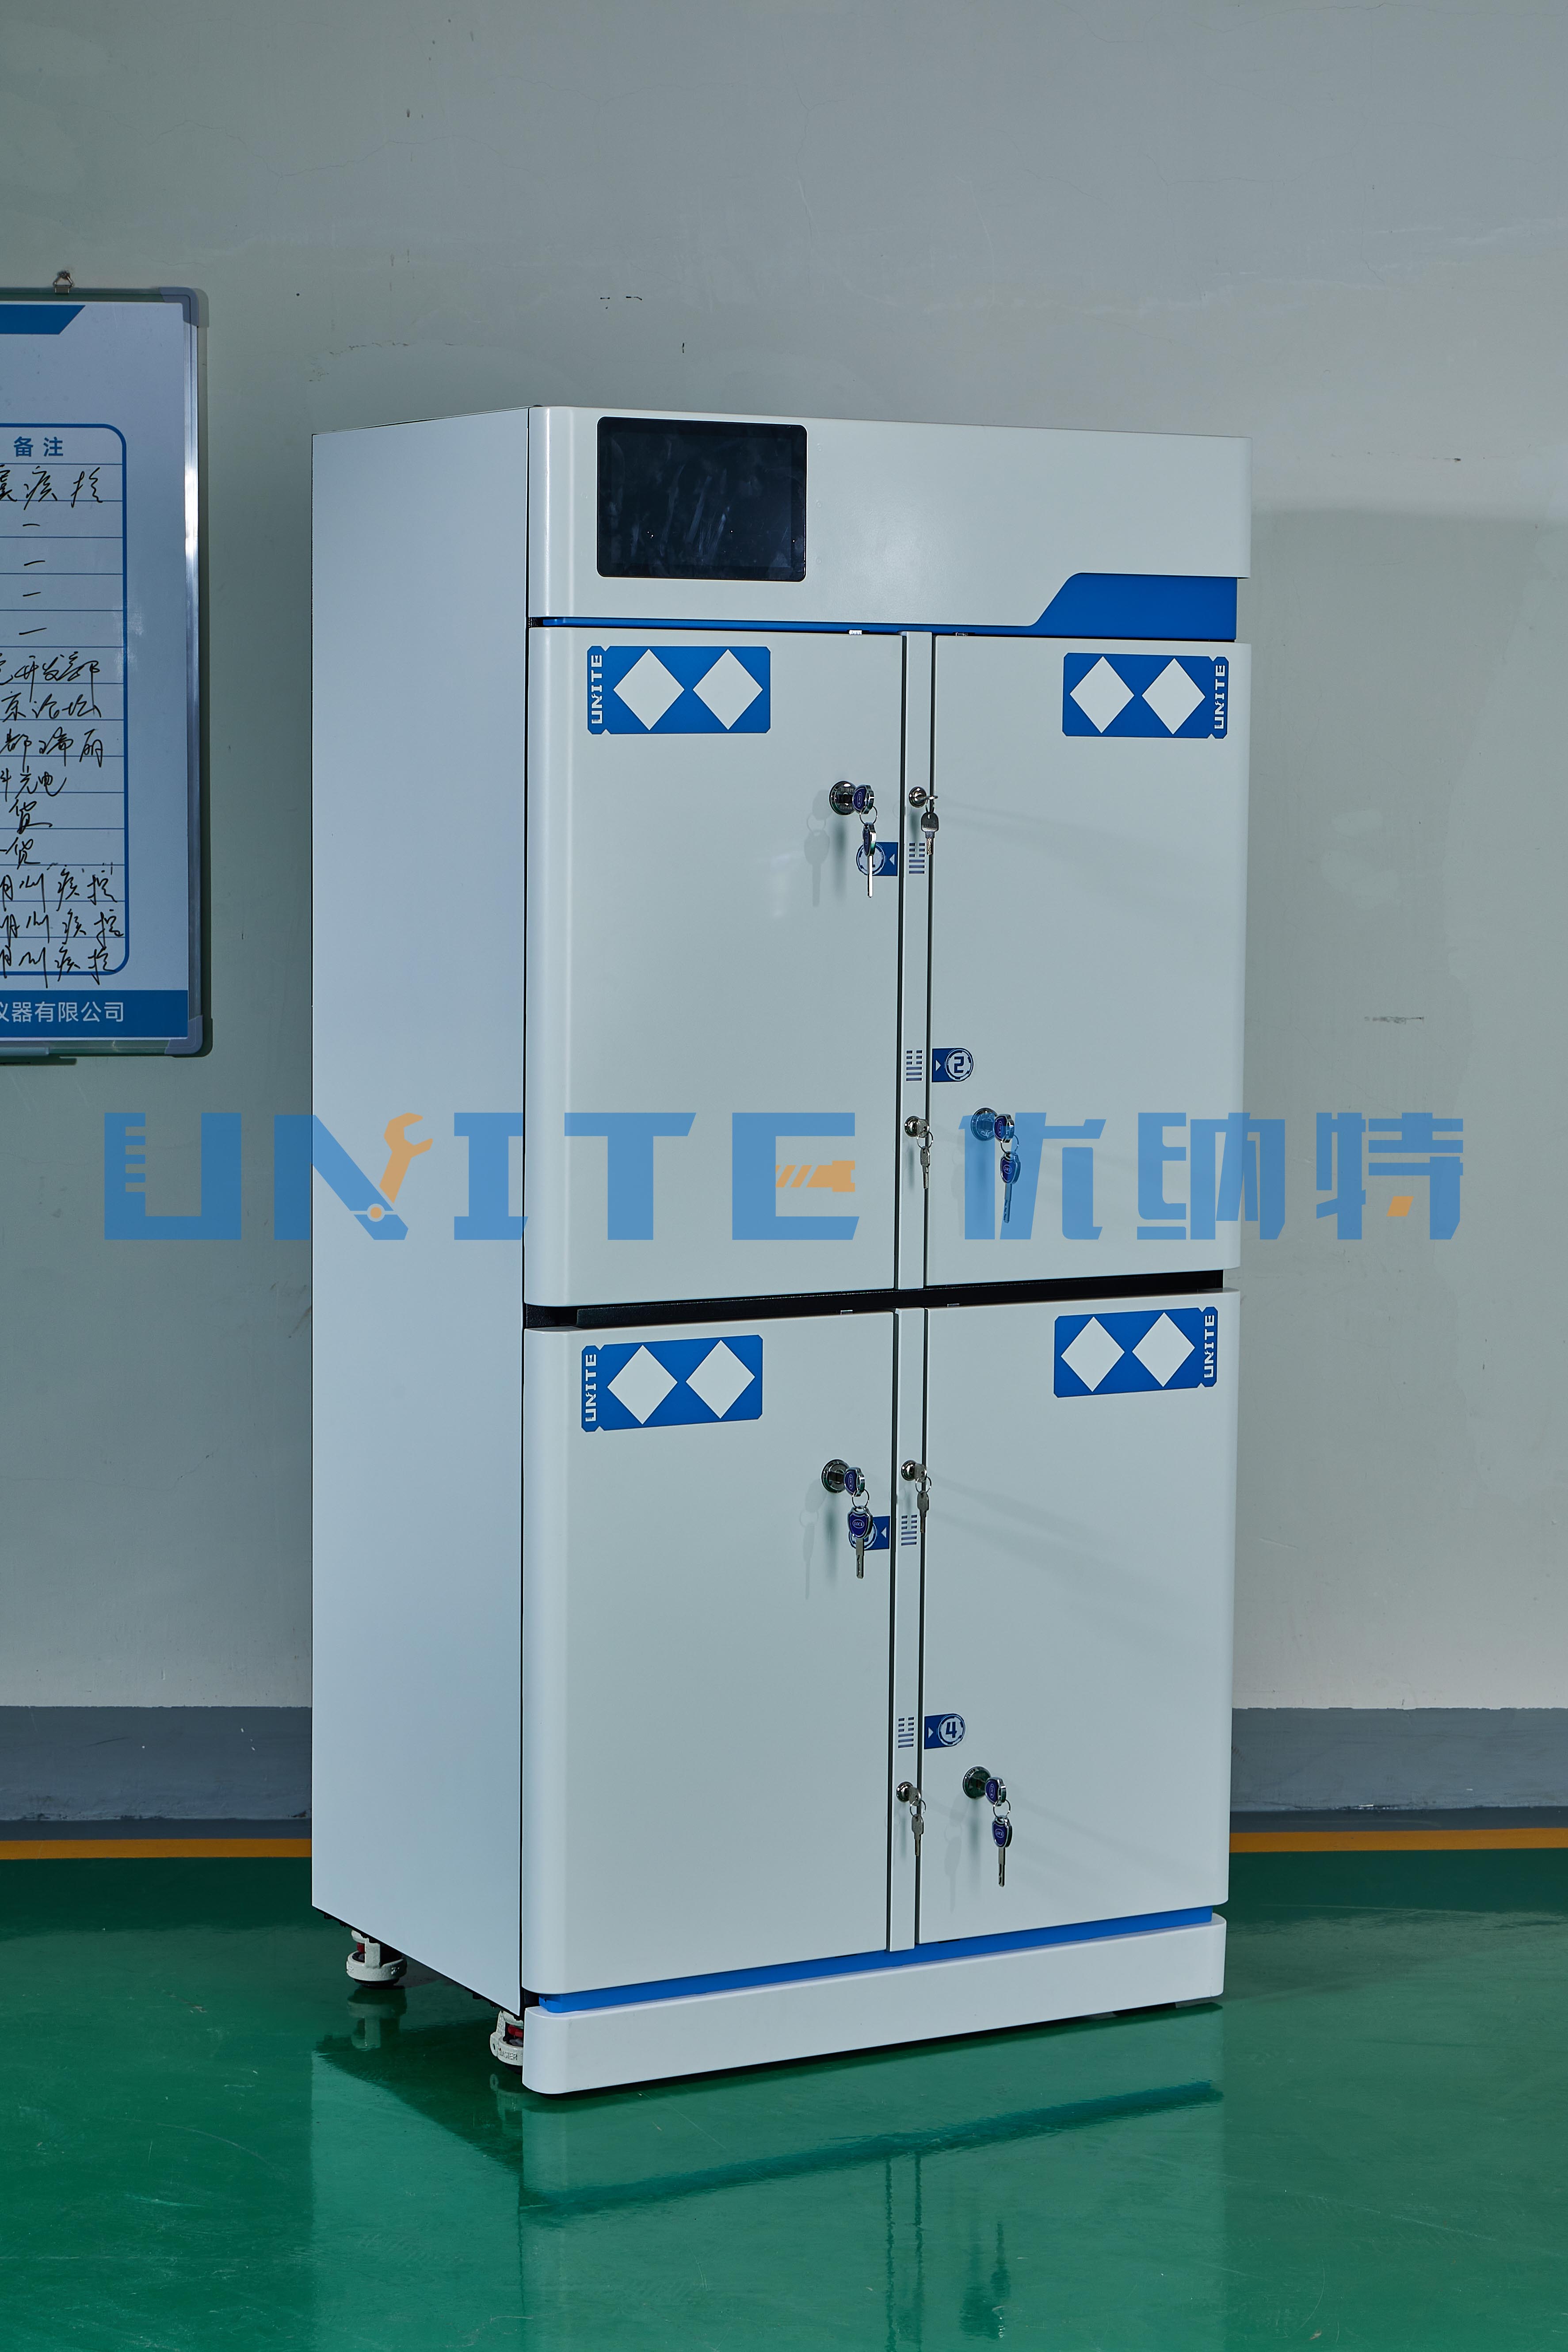 Unite Usample R4.2 Four-zone Matrix IOT Cabinets for Hazardous Chemicals(RFID) for storage of reagents, consumables